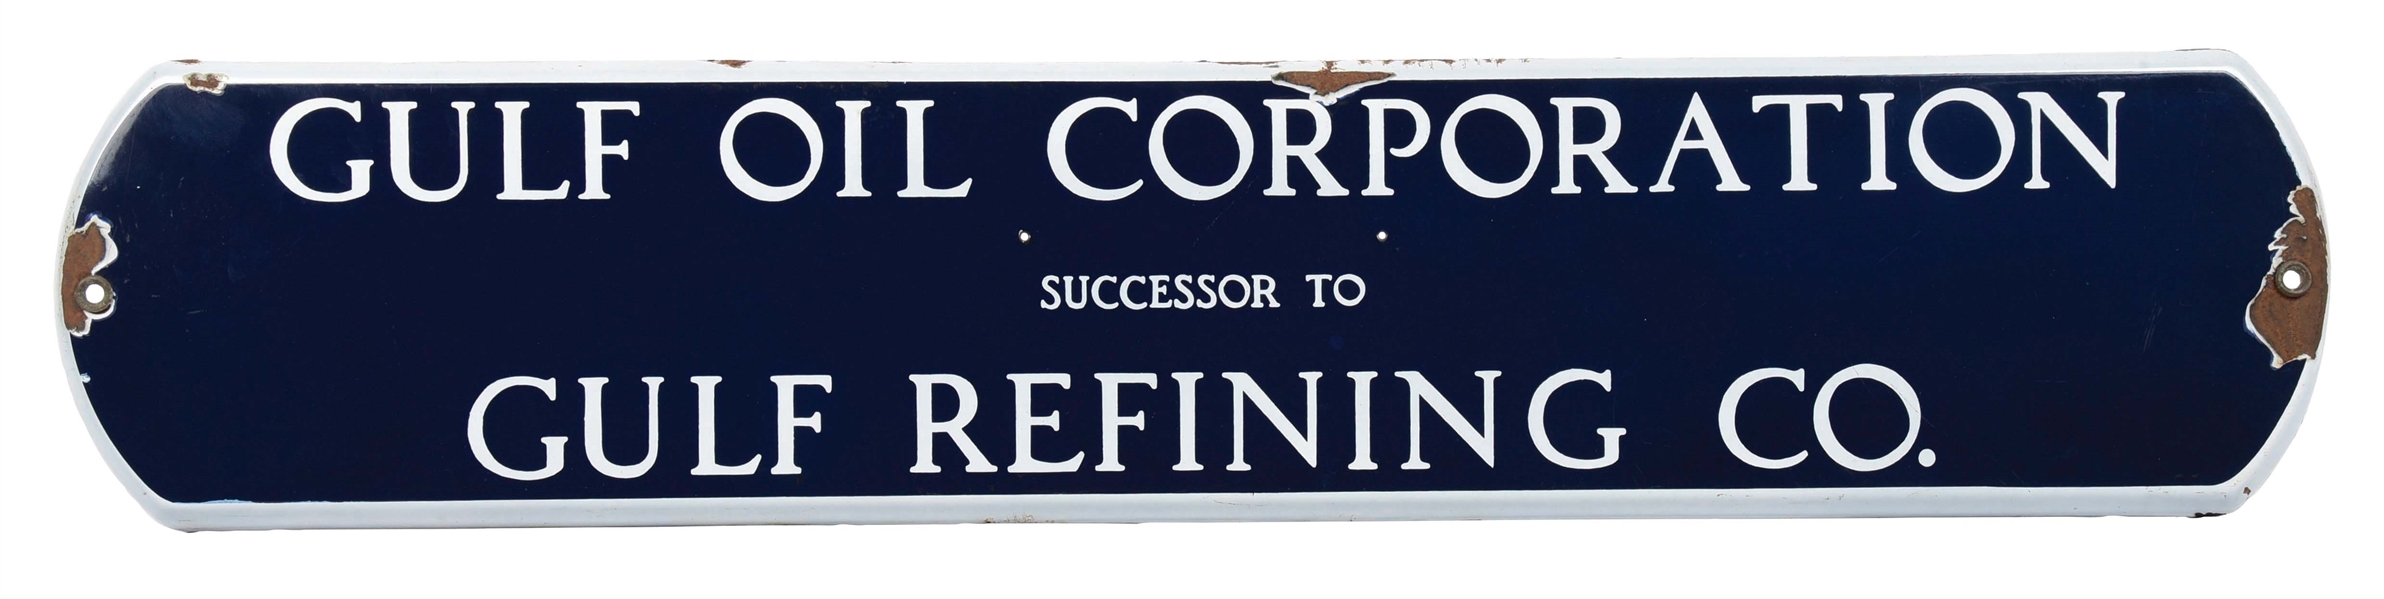 GULF OIL CORPORATION PORCELAIN SIGN W/ COOKIE CUTTER EDGE. 